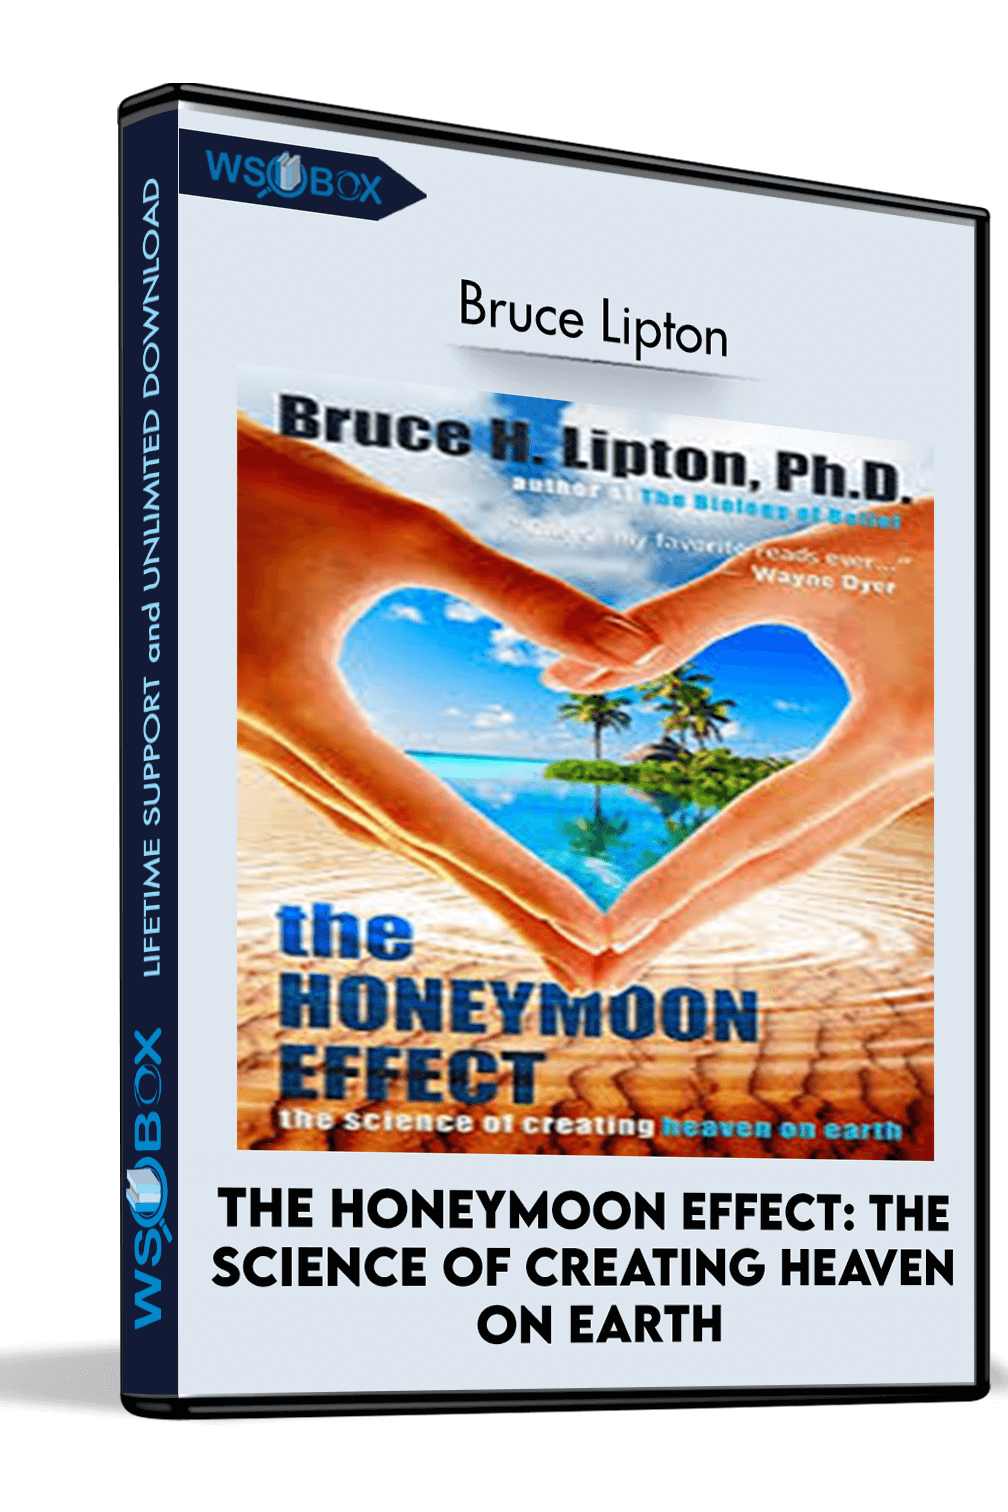 The Honeymoon Effect: The Science of Creating Heaven on Earth – Bruce Lipton